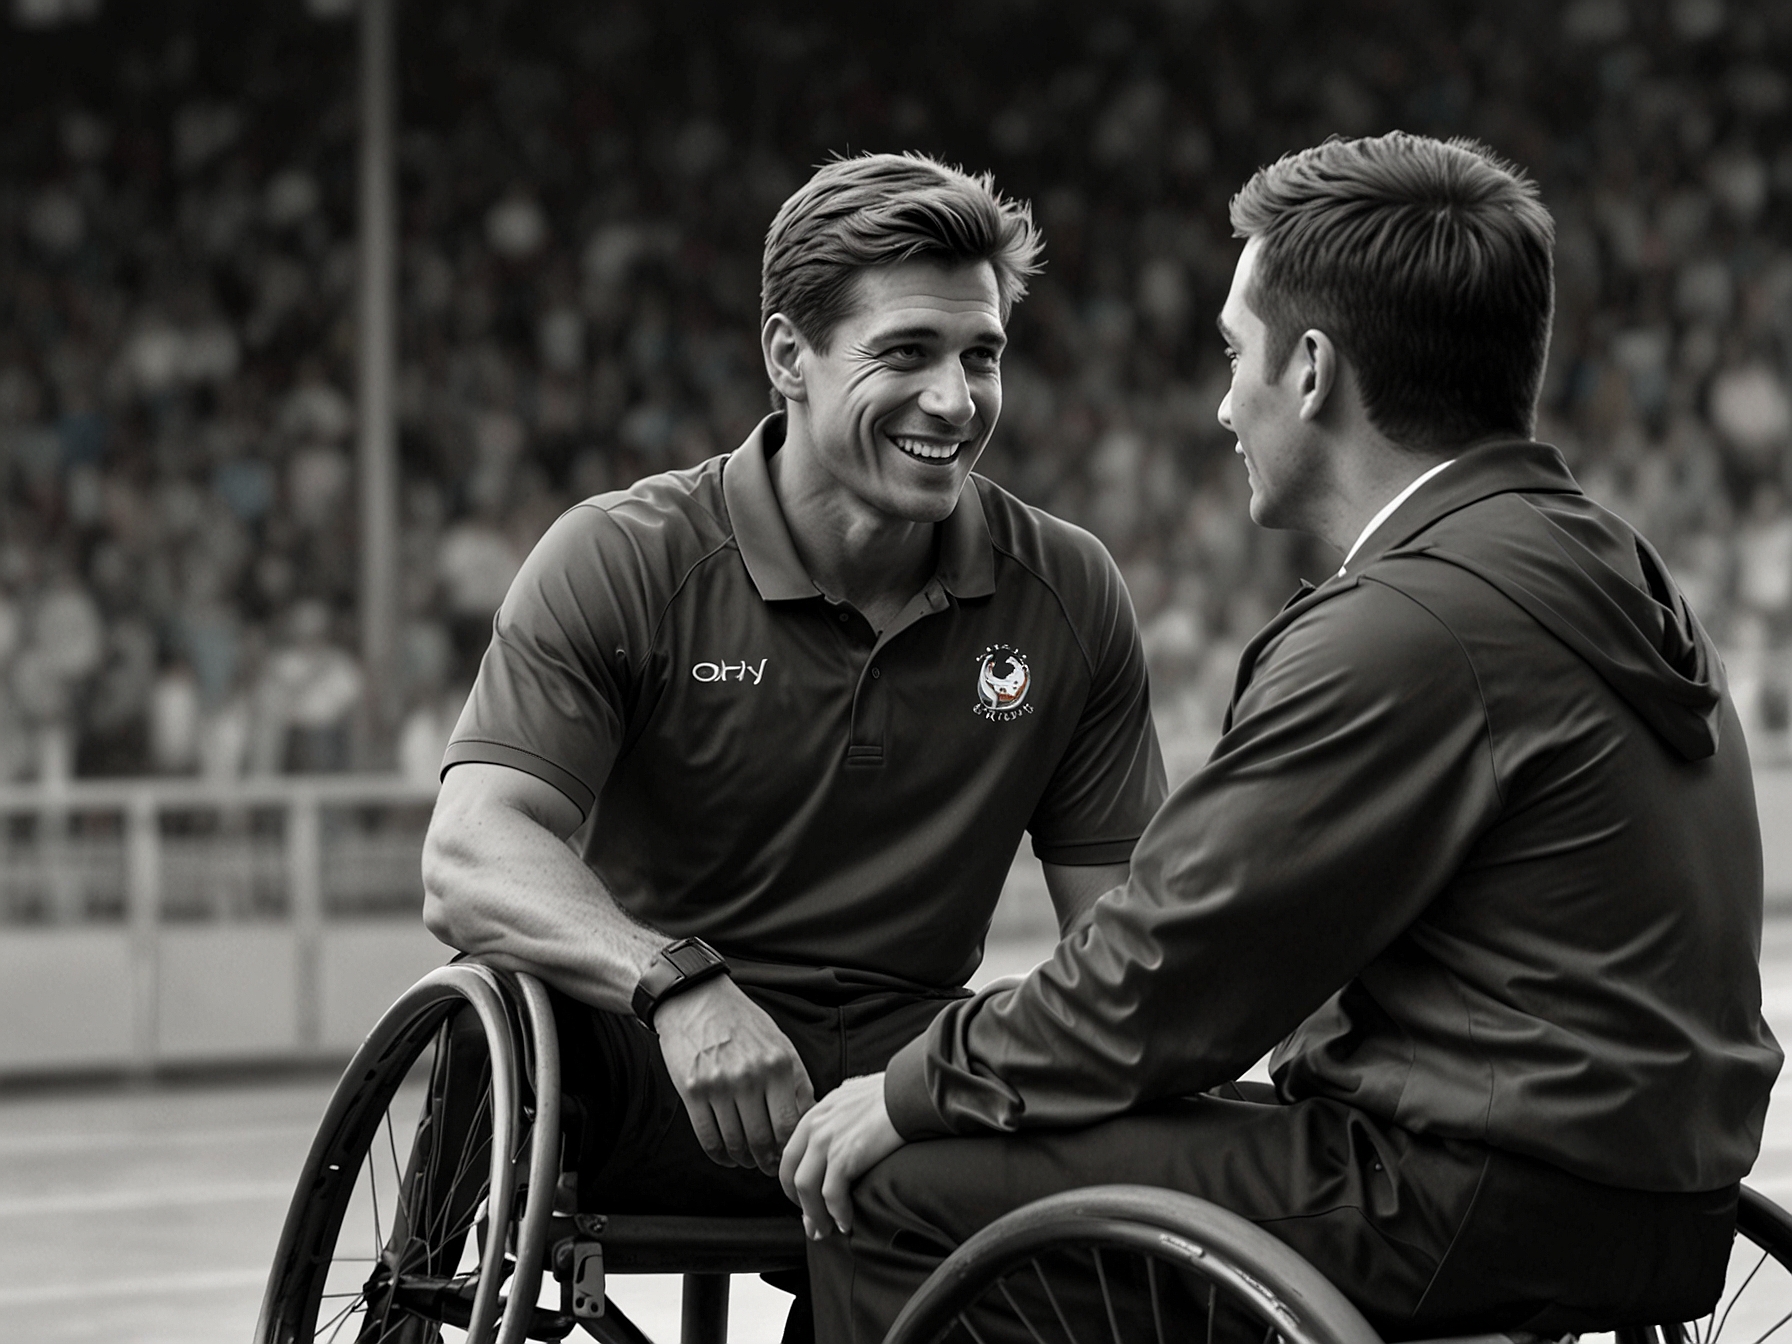 Perry is depicted interacting with young para athletes, inspiring them with his successful journey and promoting inclusivity and awareness in para sports.